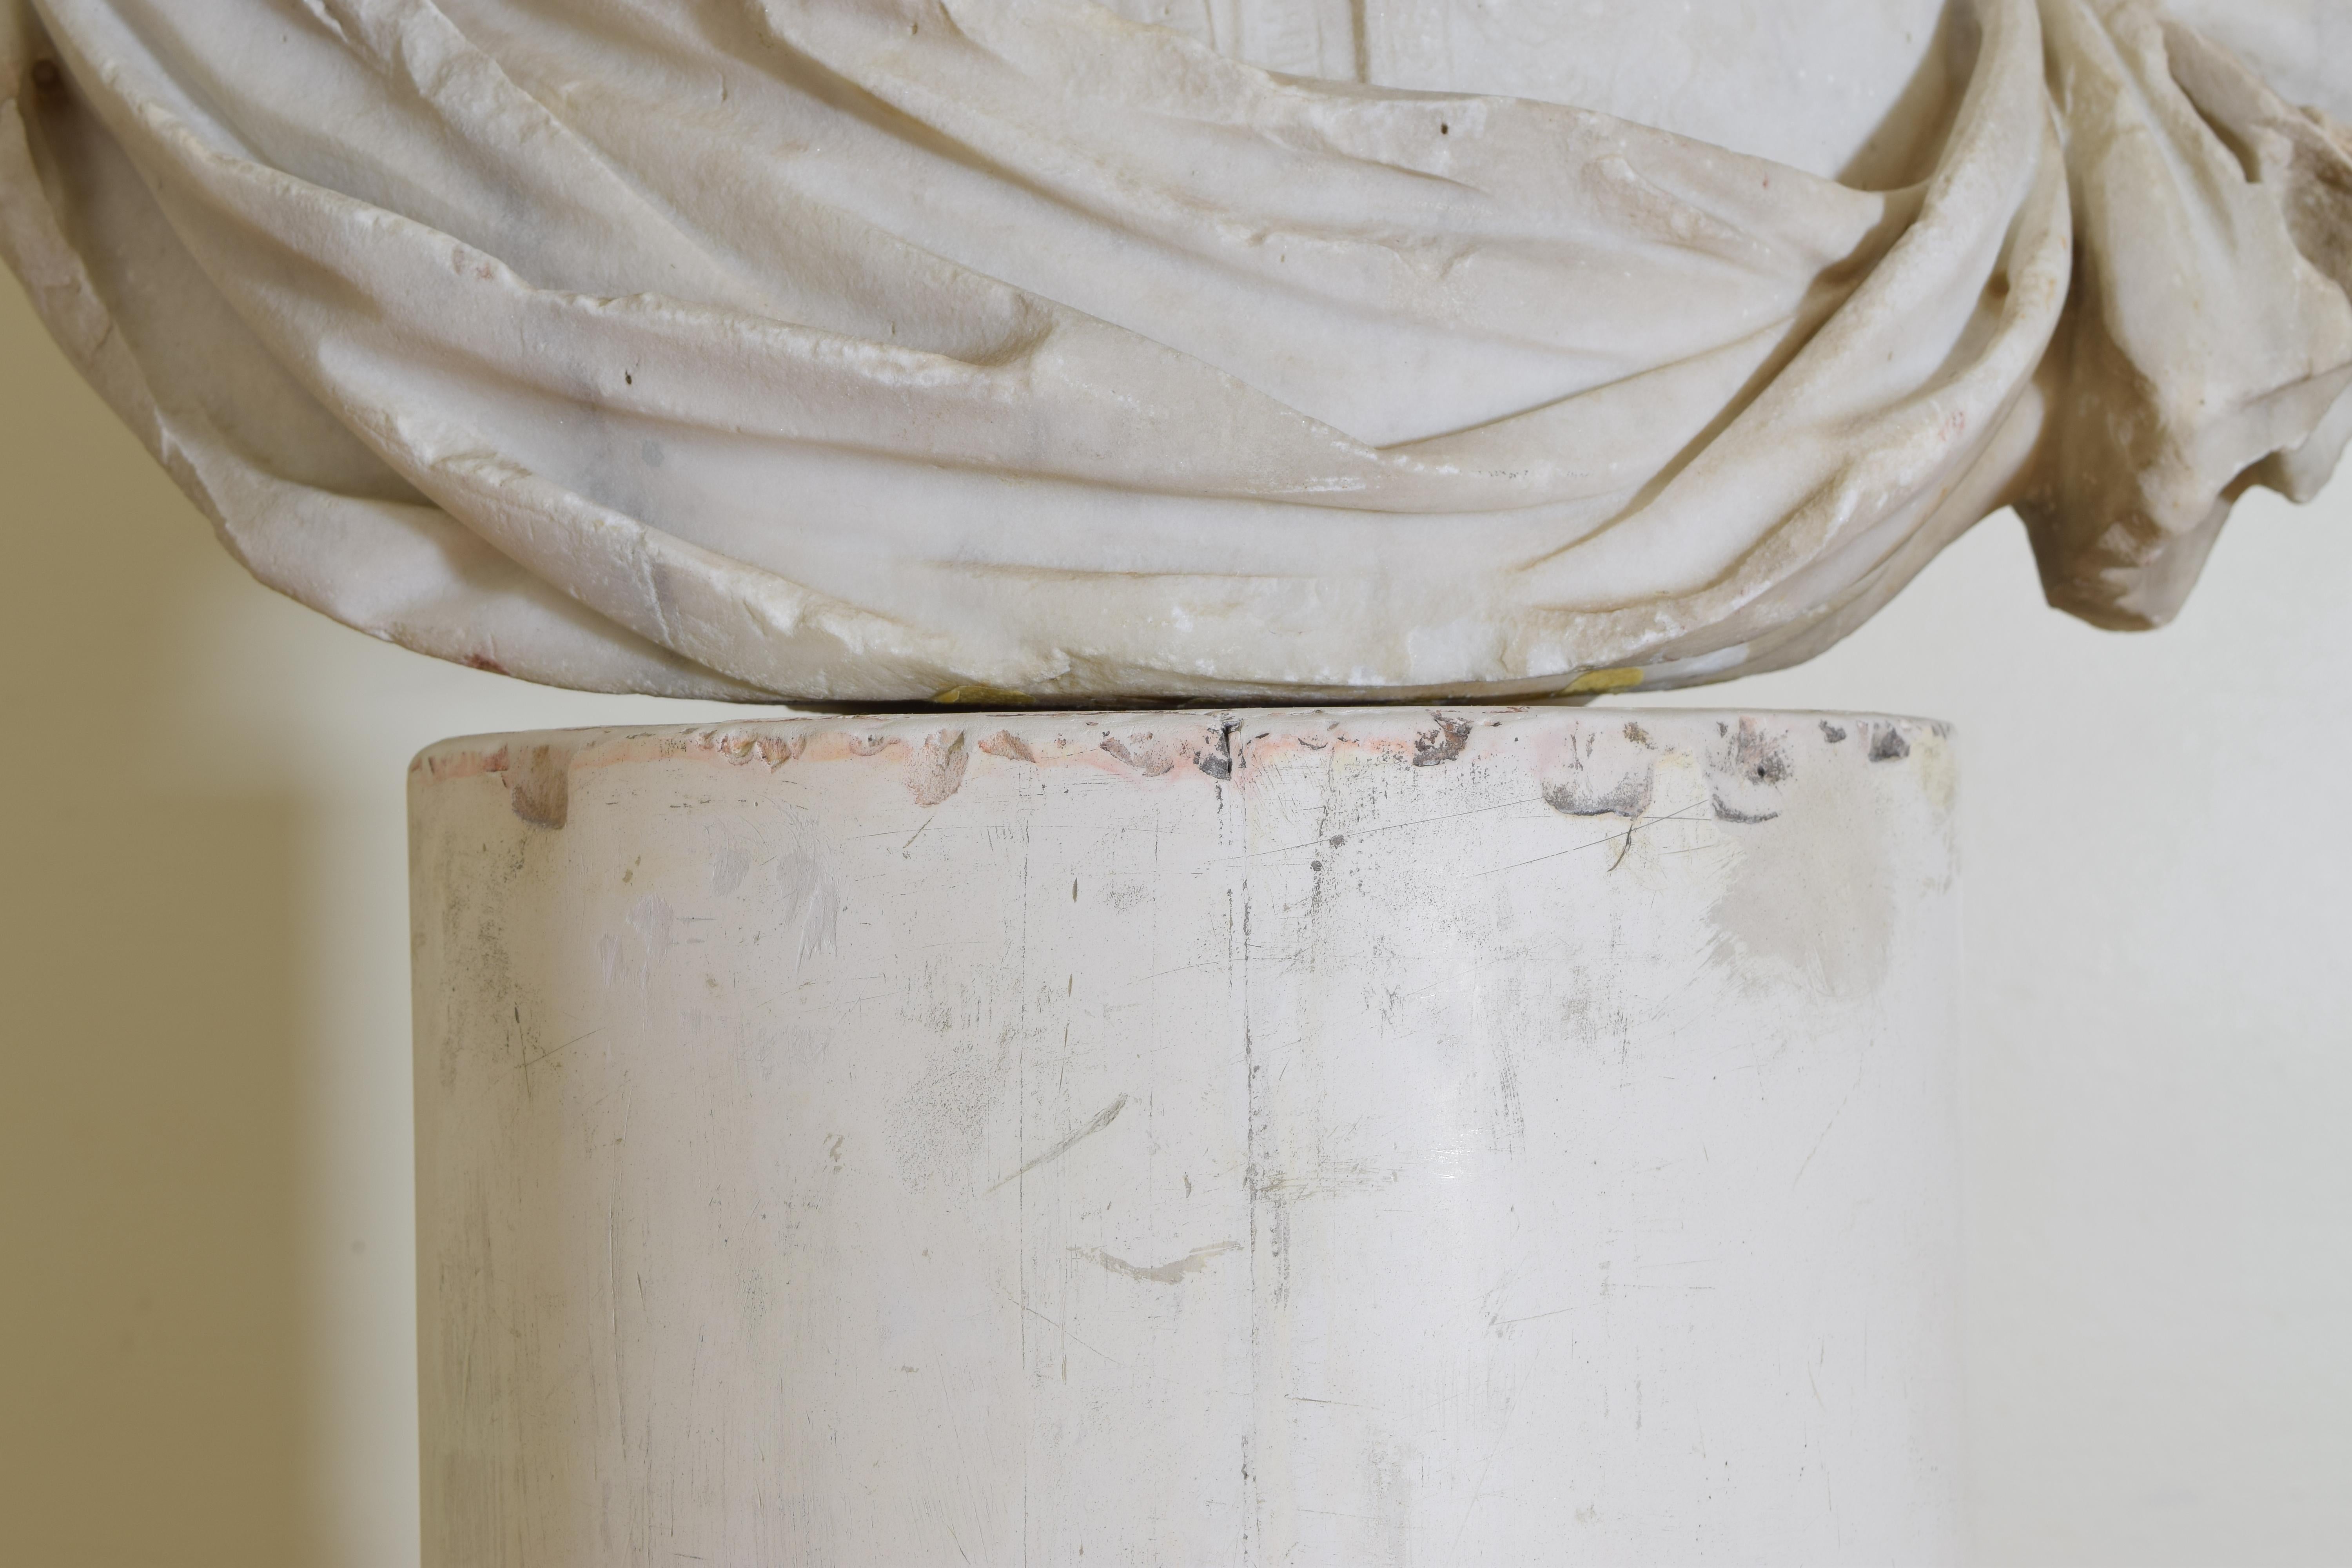 Italian Bust in Statuary Marble on Later Plaster Pedestal, 18th-19th Century For Sale 6